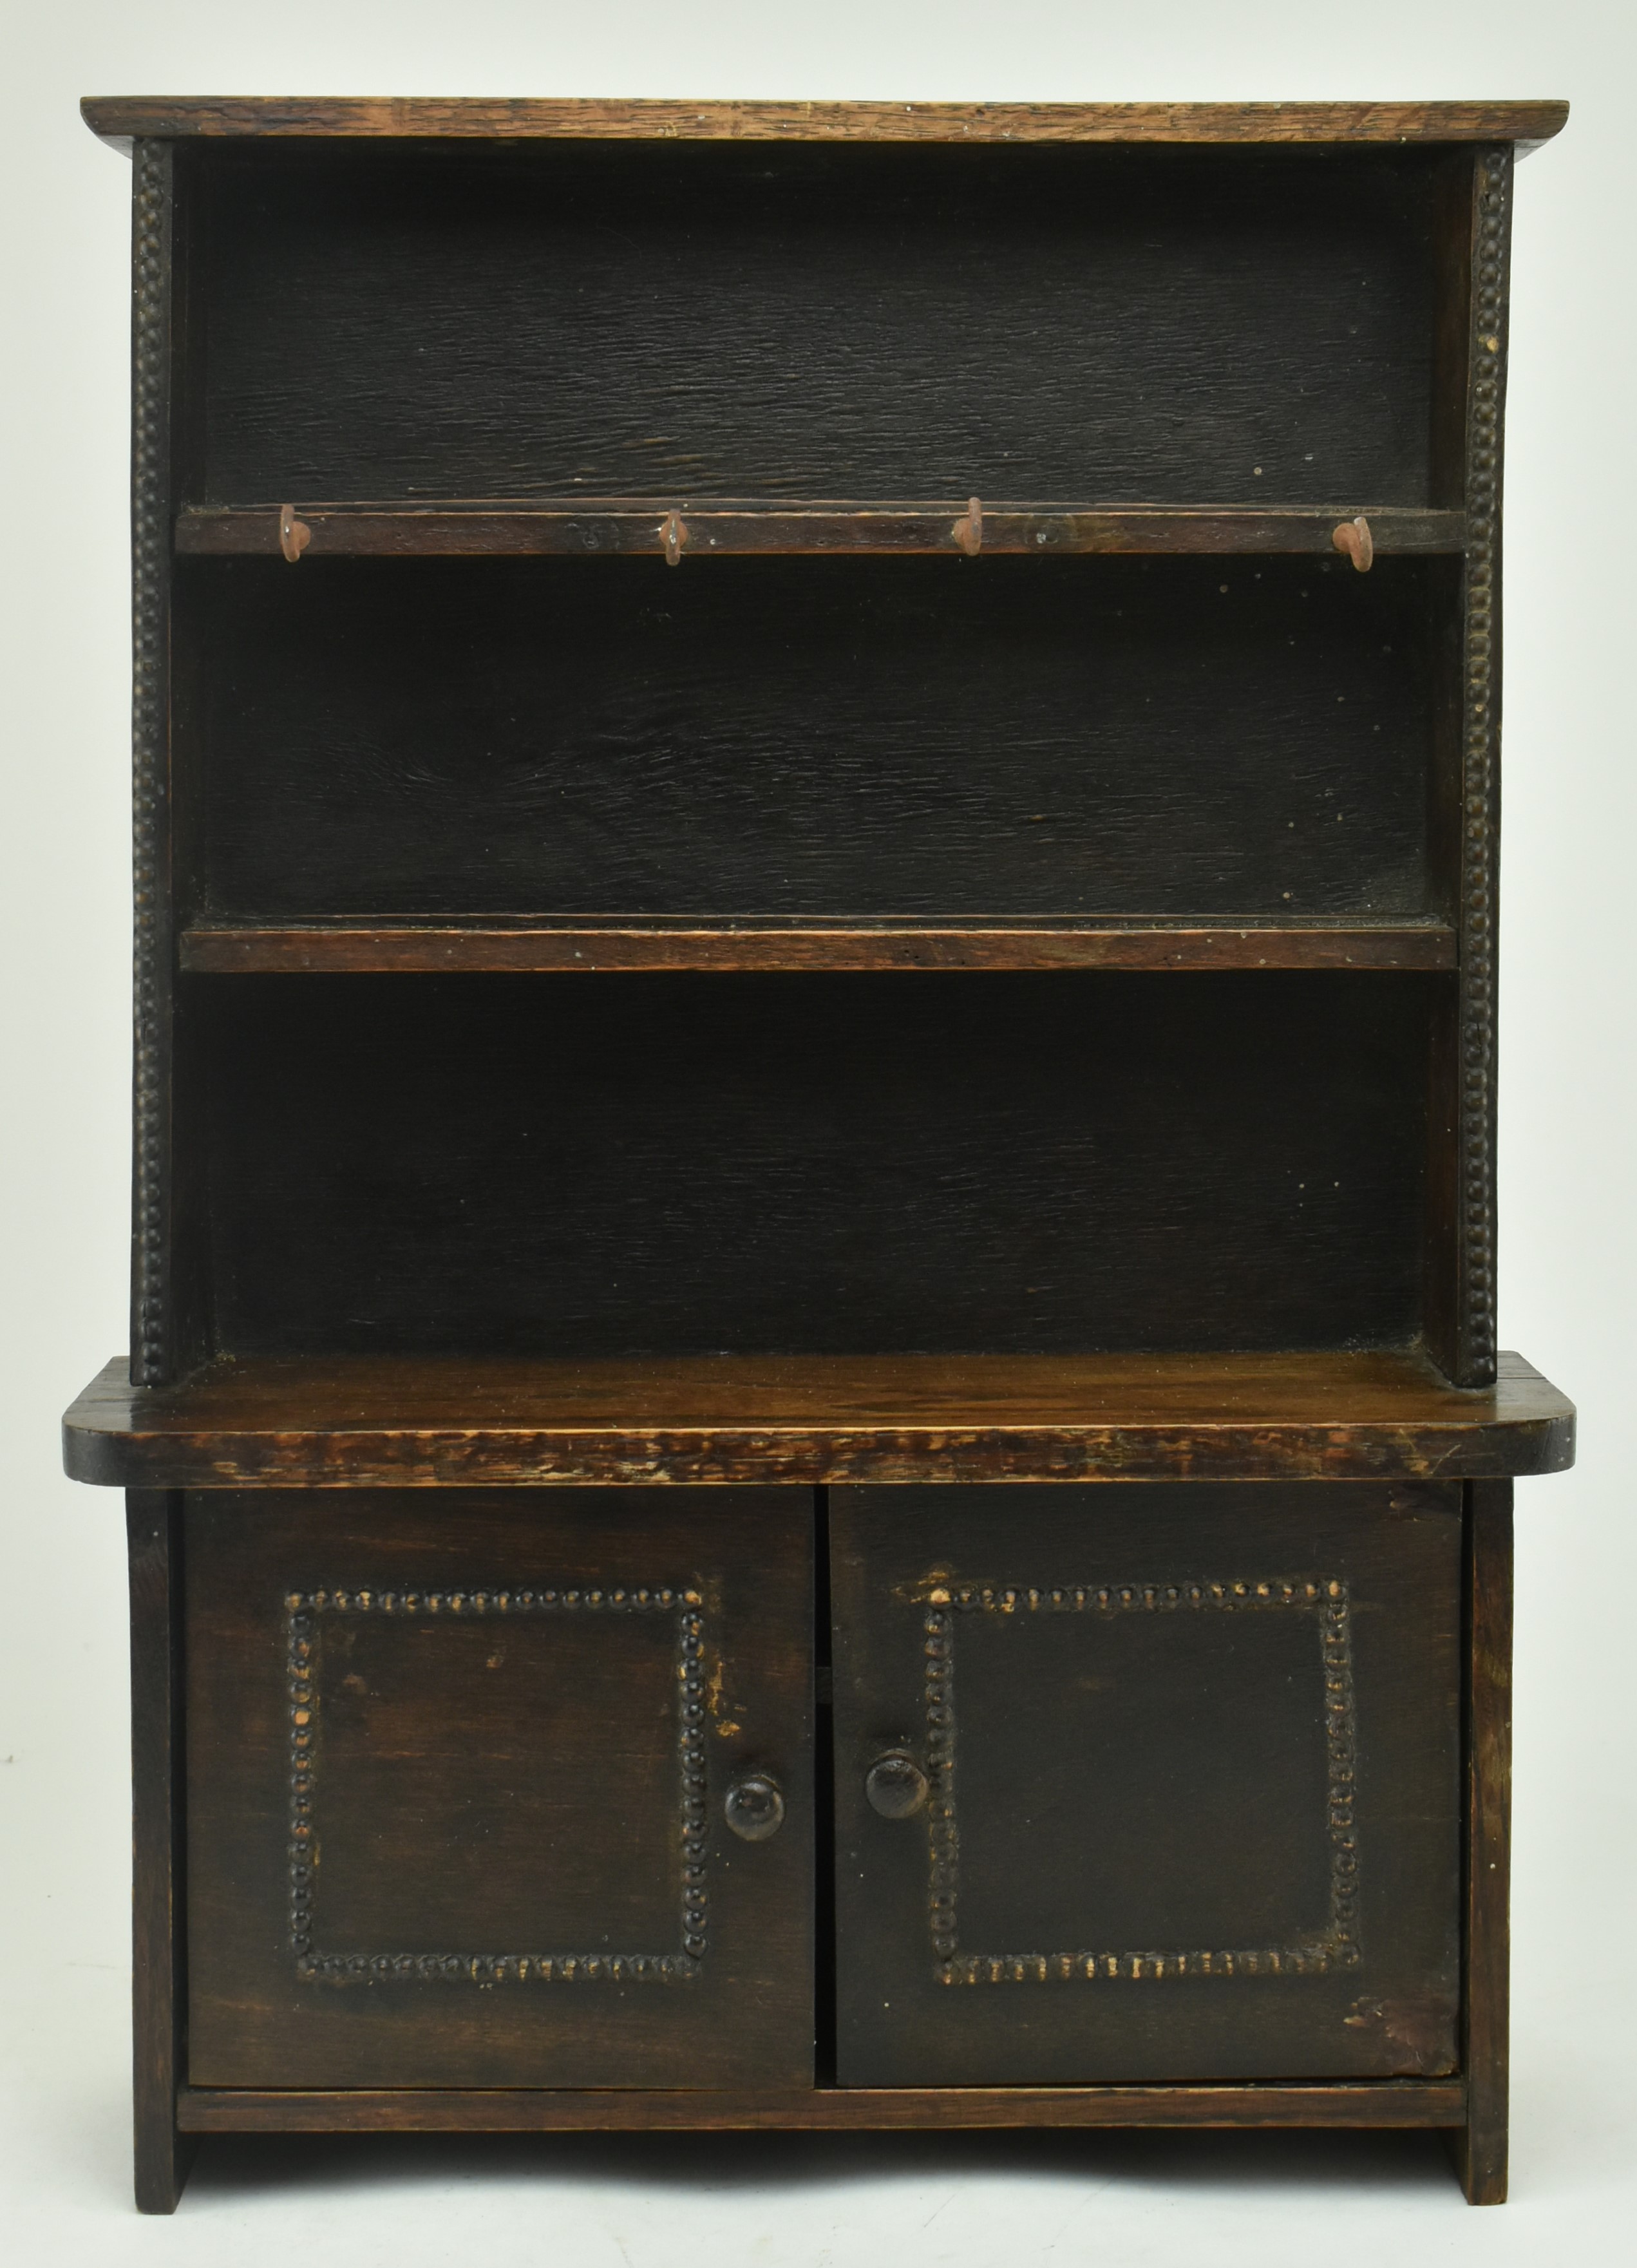 EARLY 20TH CENTURY MAHOGANY WELSH MINIATURE DRESSER - Image 2 of 6